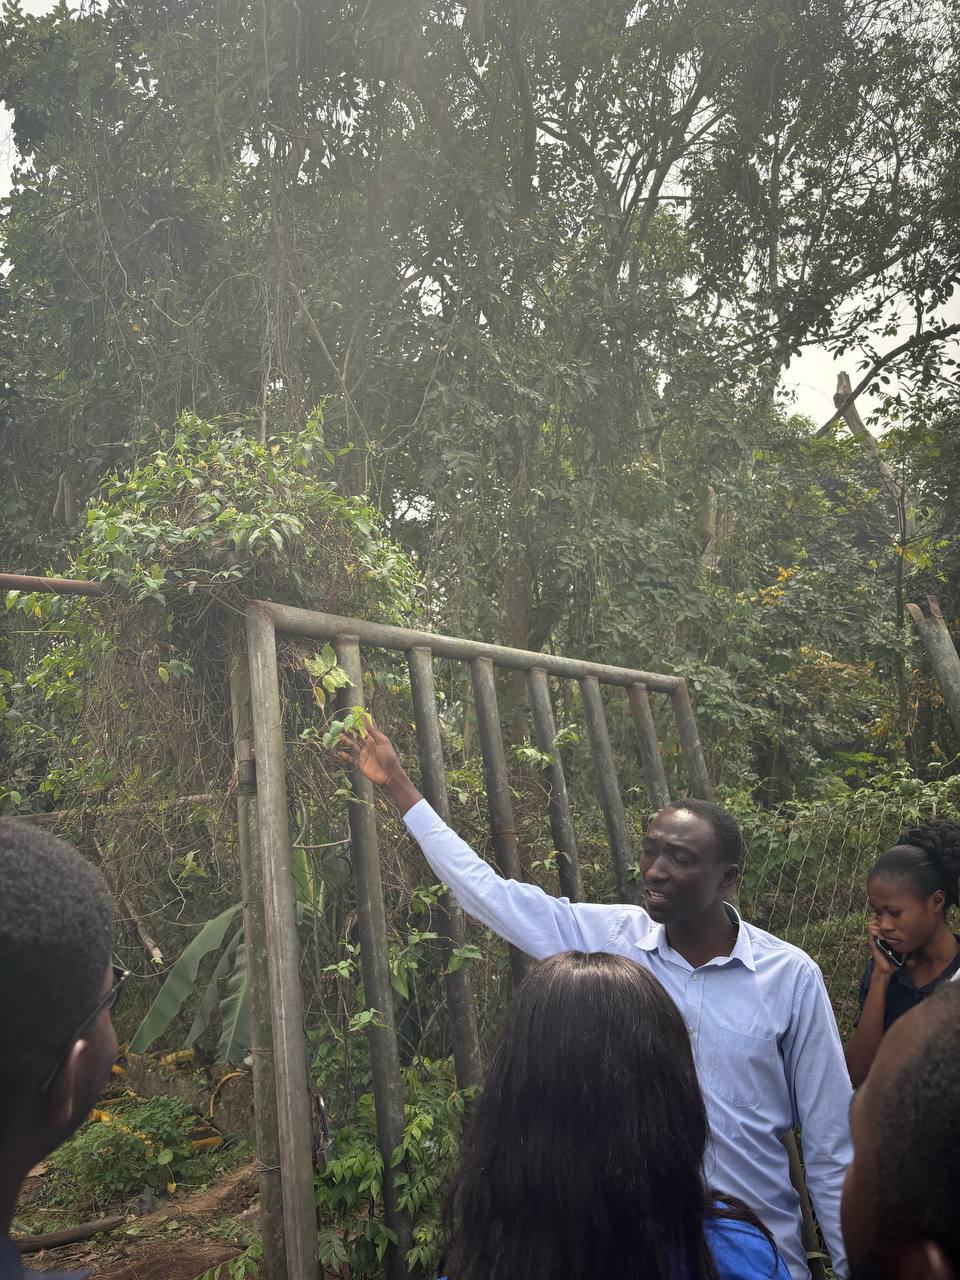 Educational Trip to Centre for Plant Medicine Research, Mampong-Akuapem